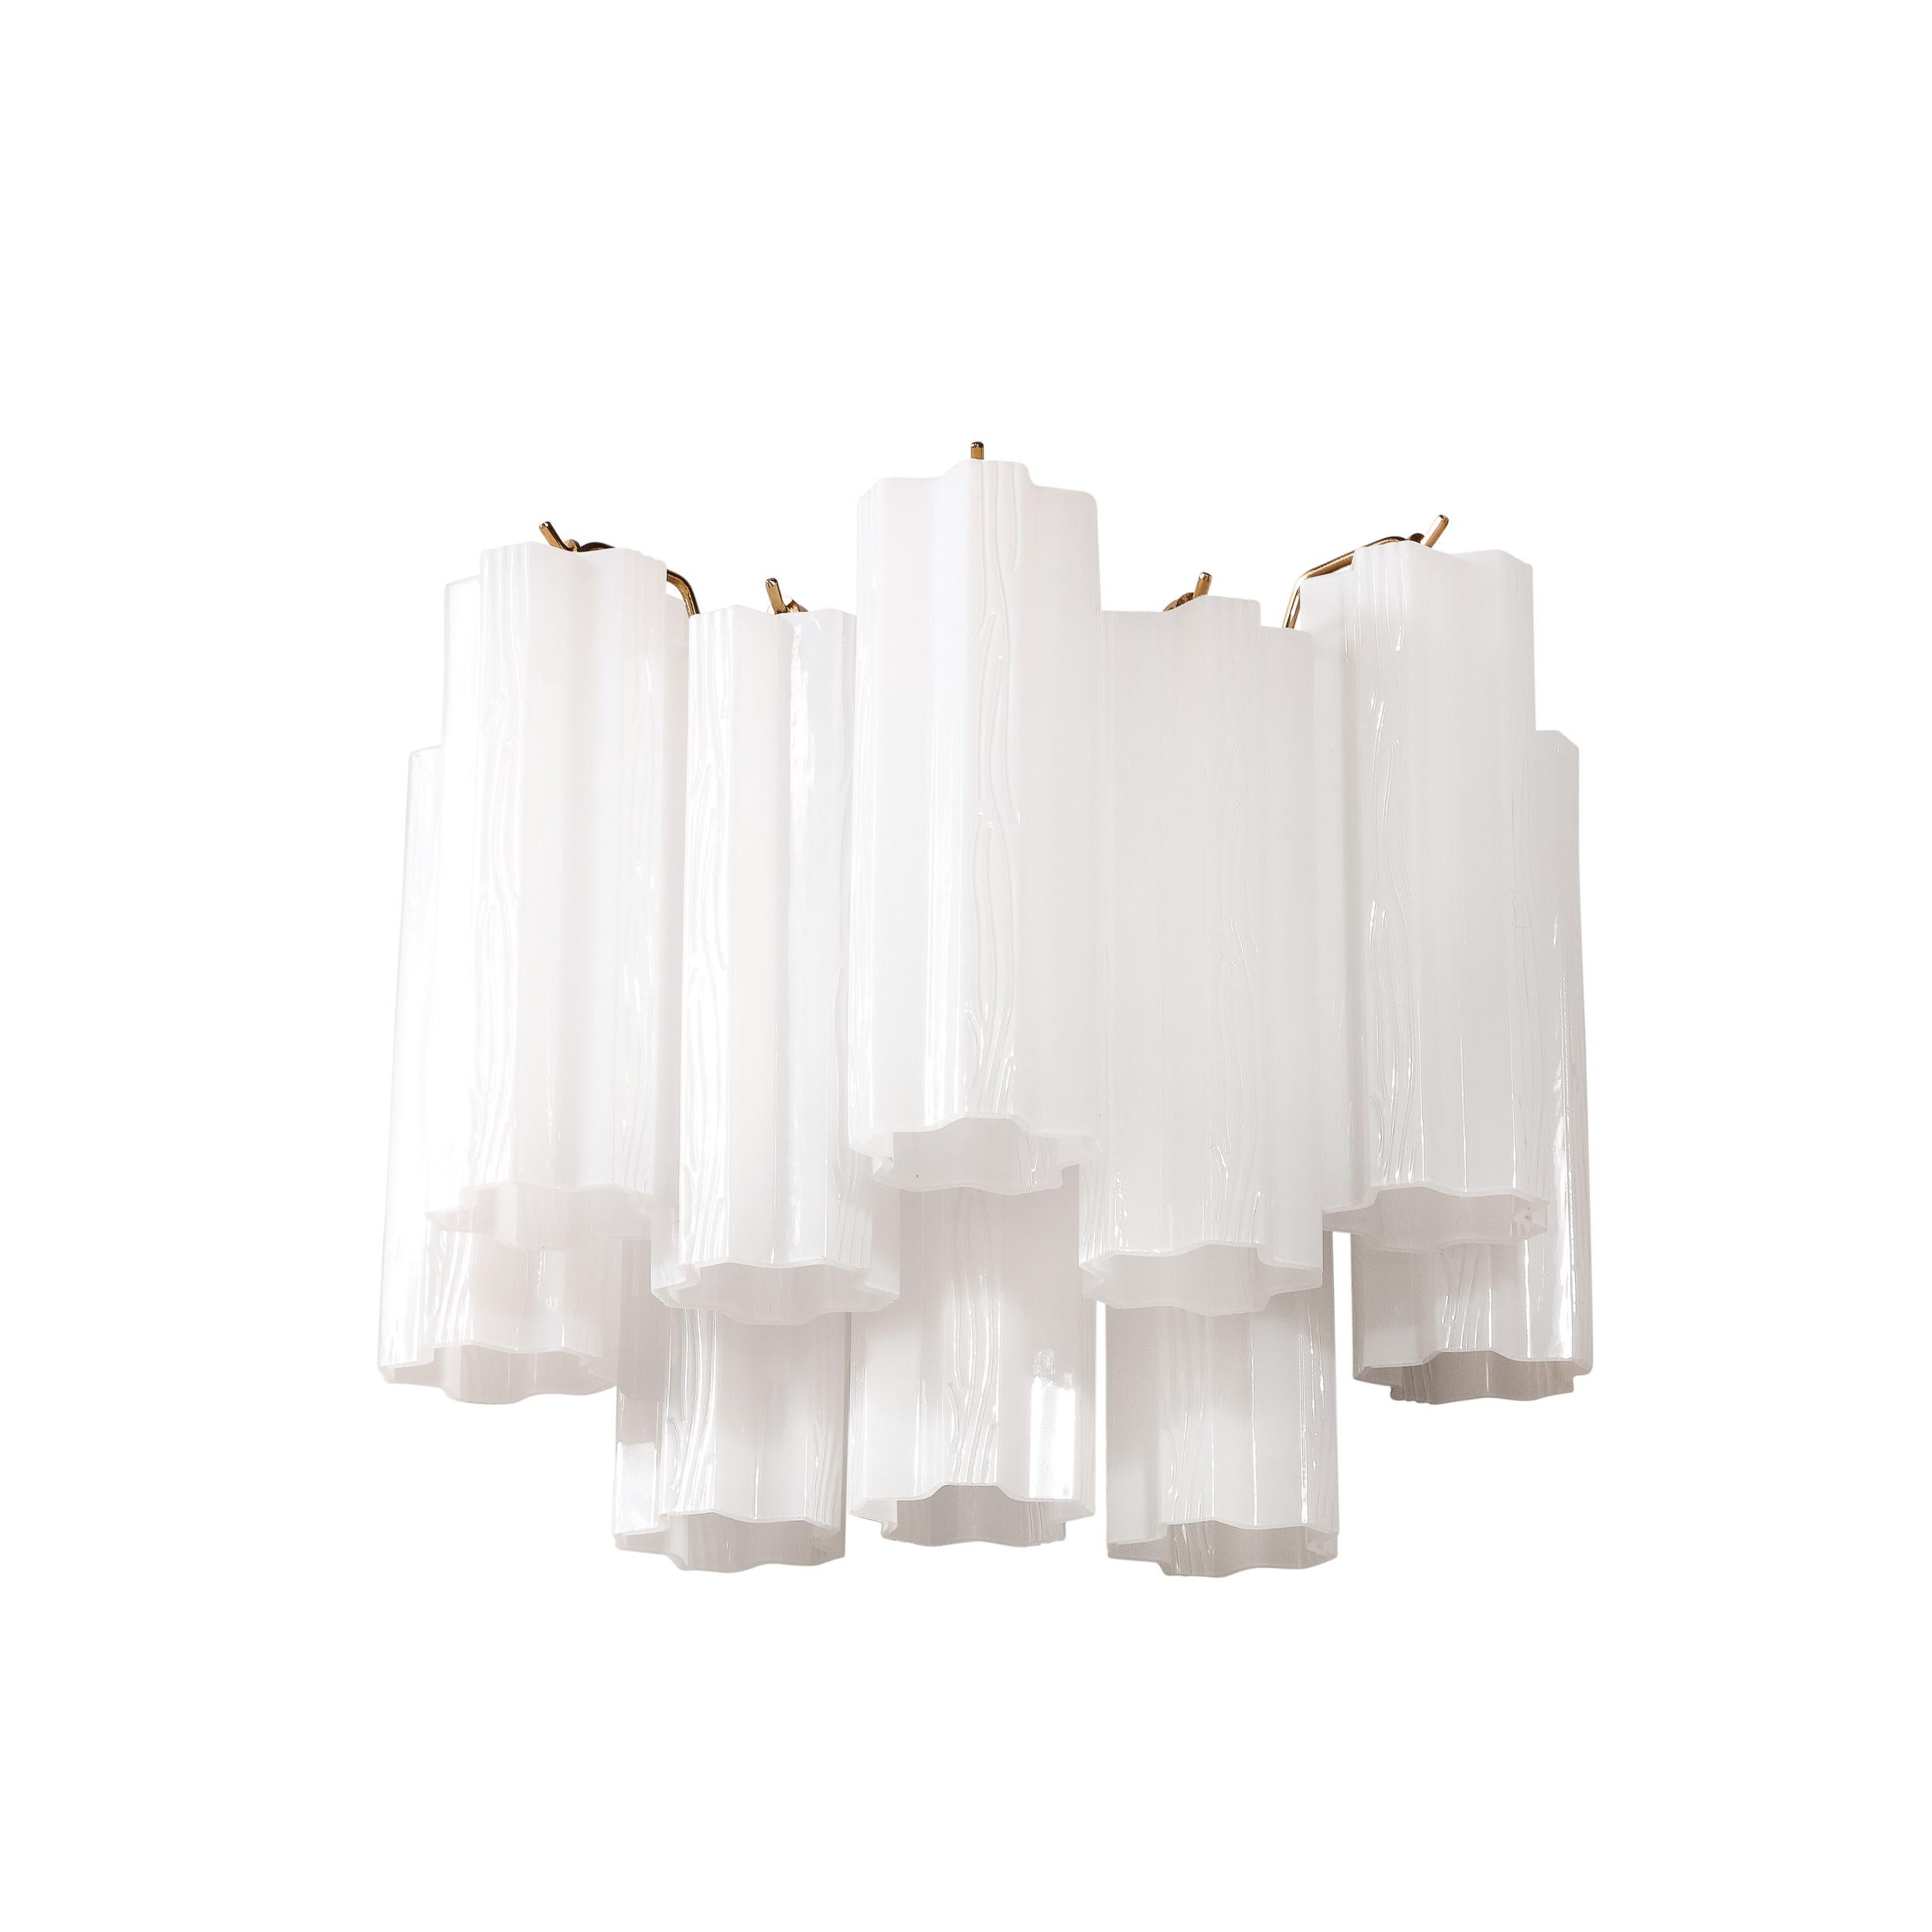 This pair of sconces originates from the United States circa 1980. Featuring two tears of Tronchi form, opaline, glass shades which hang from a polished brass frame. The opacity of the opaline hue, beautifully diffuses light creating elegant